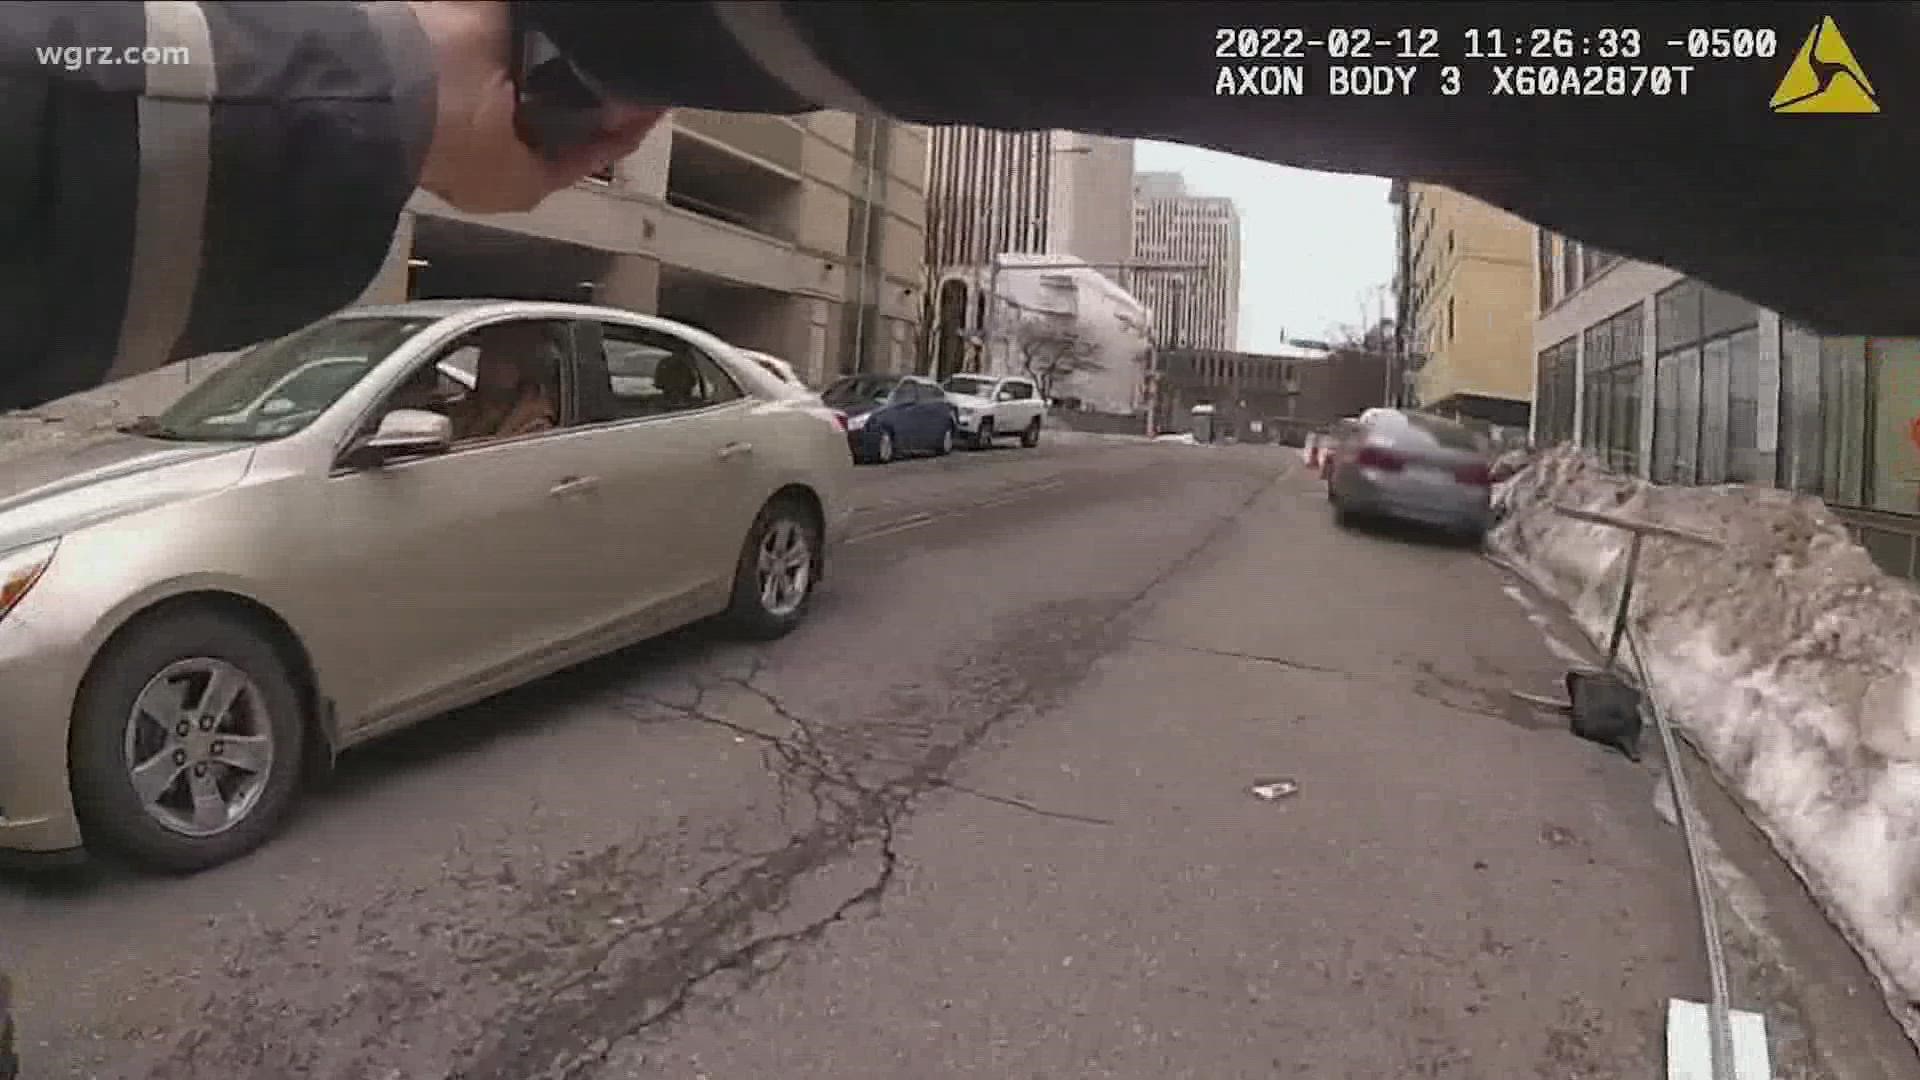 Body cam footage from trooper-involved shooting in Buffalo released wgrz